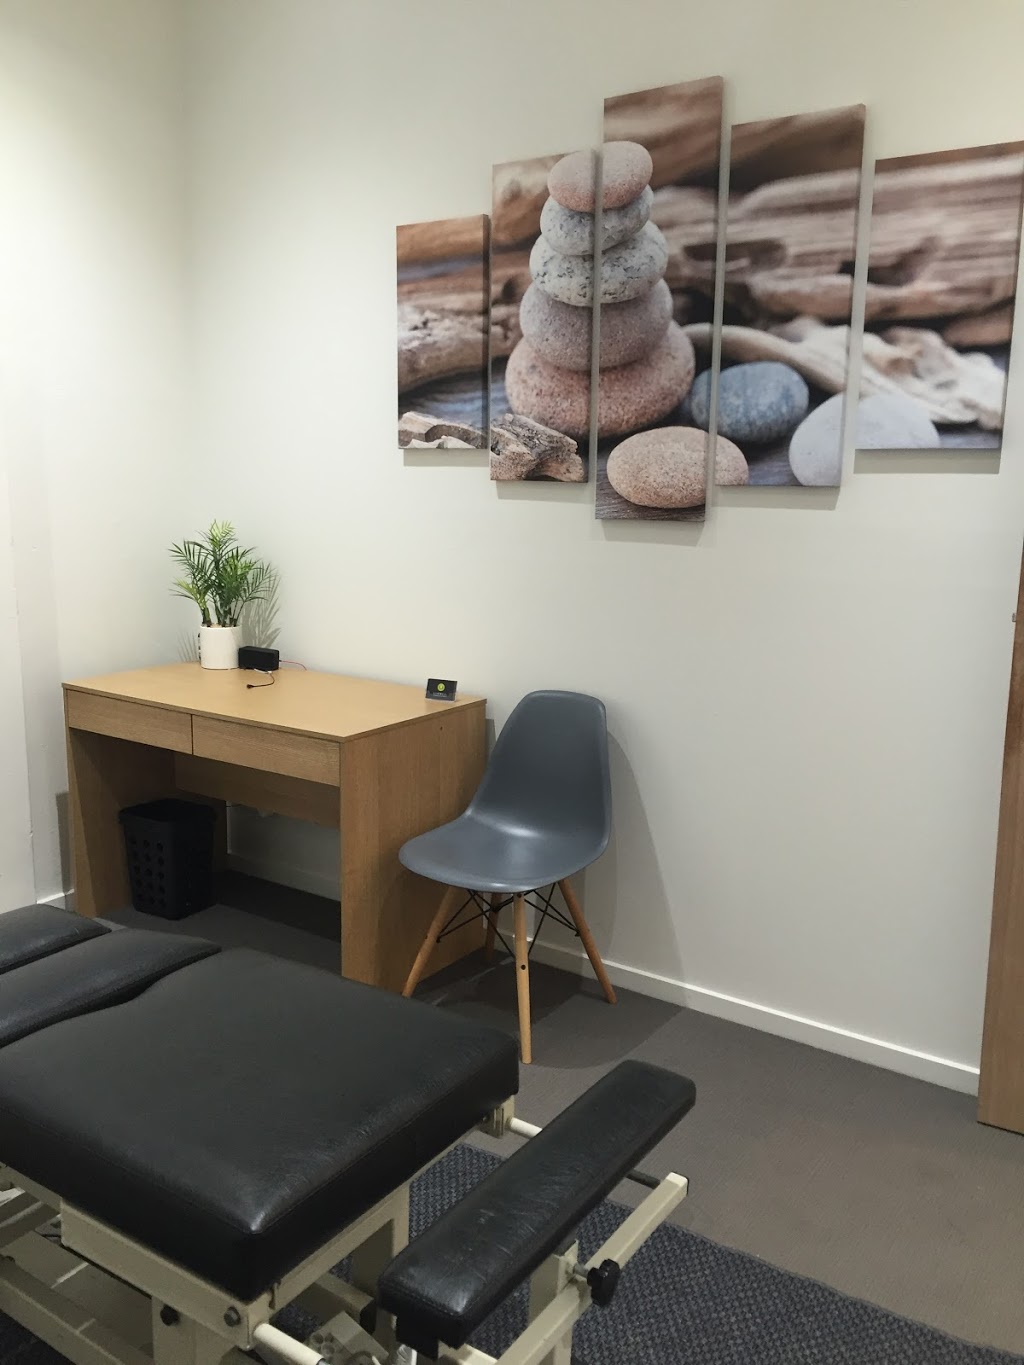 Livewell Chiropractic & Health | health | 88A Partridge St, Glenelg South SA 5045, Australia | 0872255538 OR +61 8 7225 5538